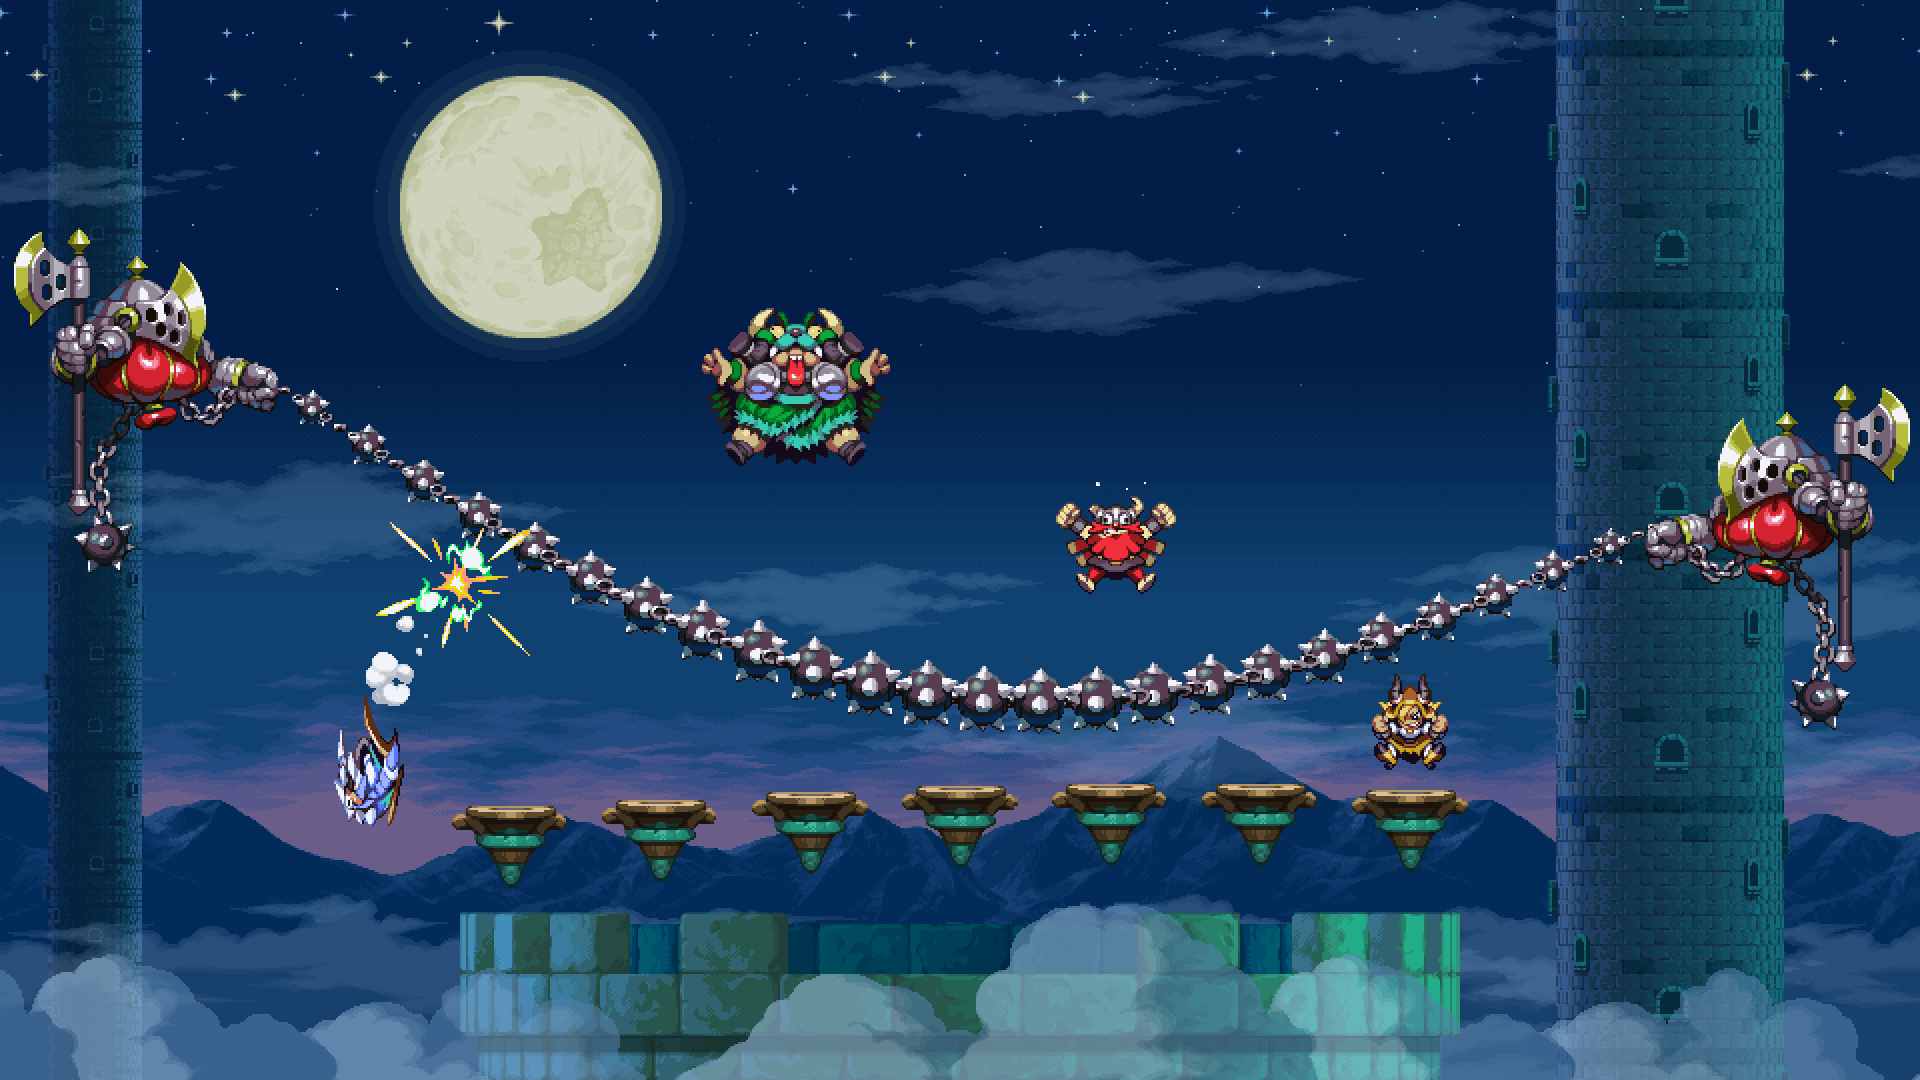 Screenshot from videogame Vikings on Trampolines.